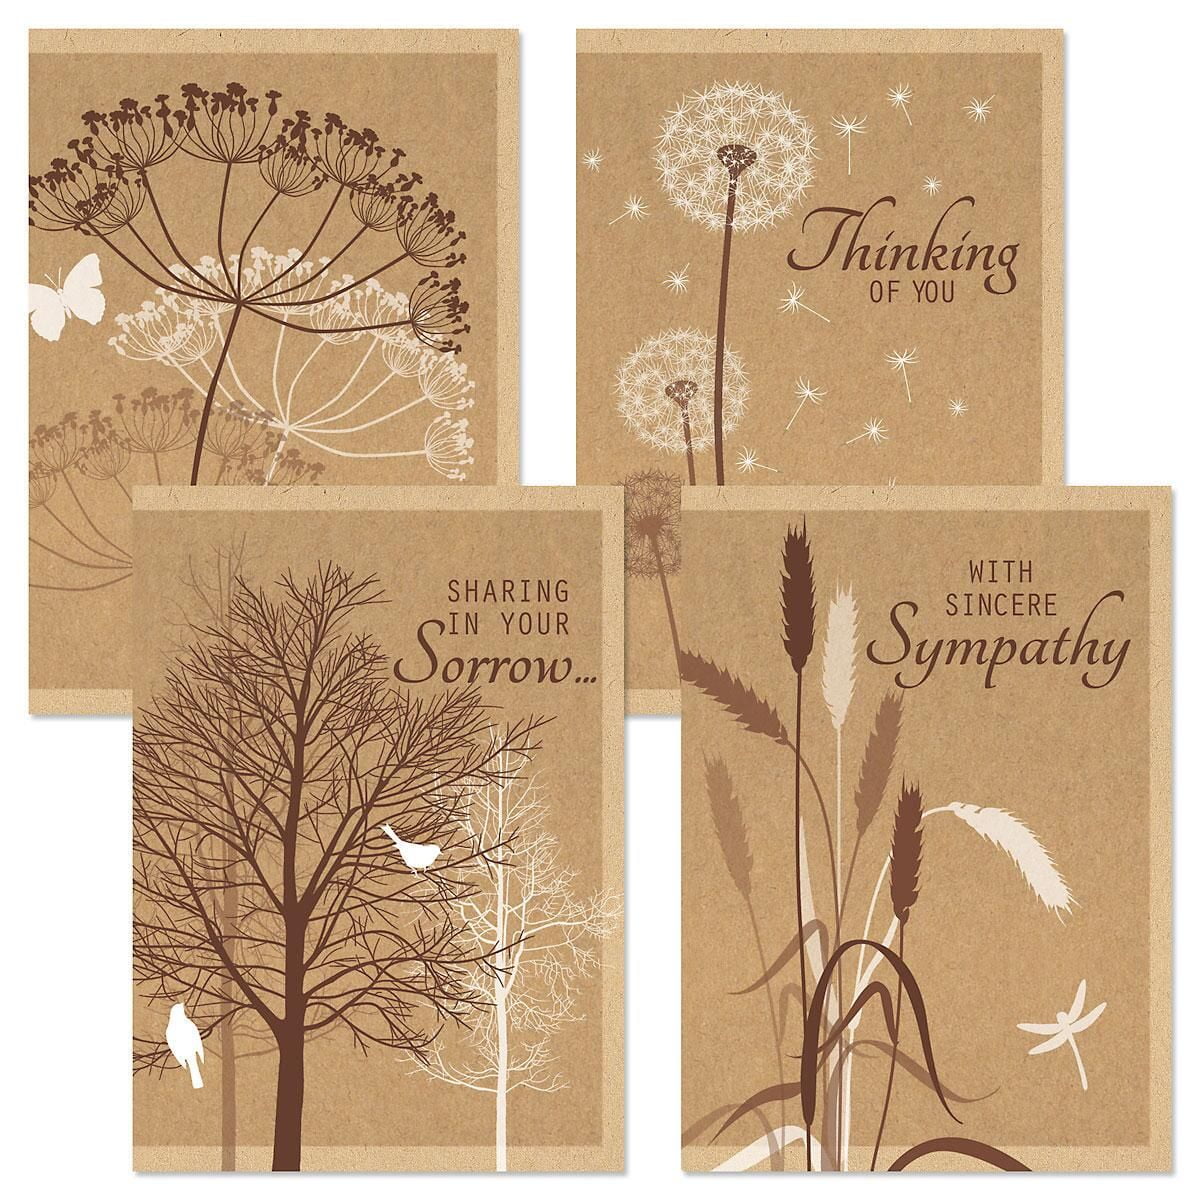 LOT 8 ASST SCENIC SYMPATHY CARDS/ENV..JUST $.50 EA...4 DIFF DESIGNS..CURRENT 